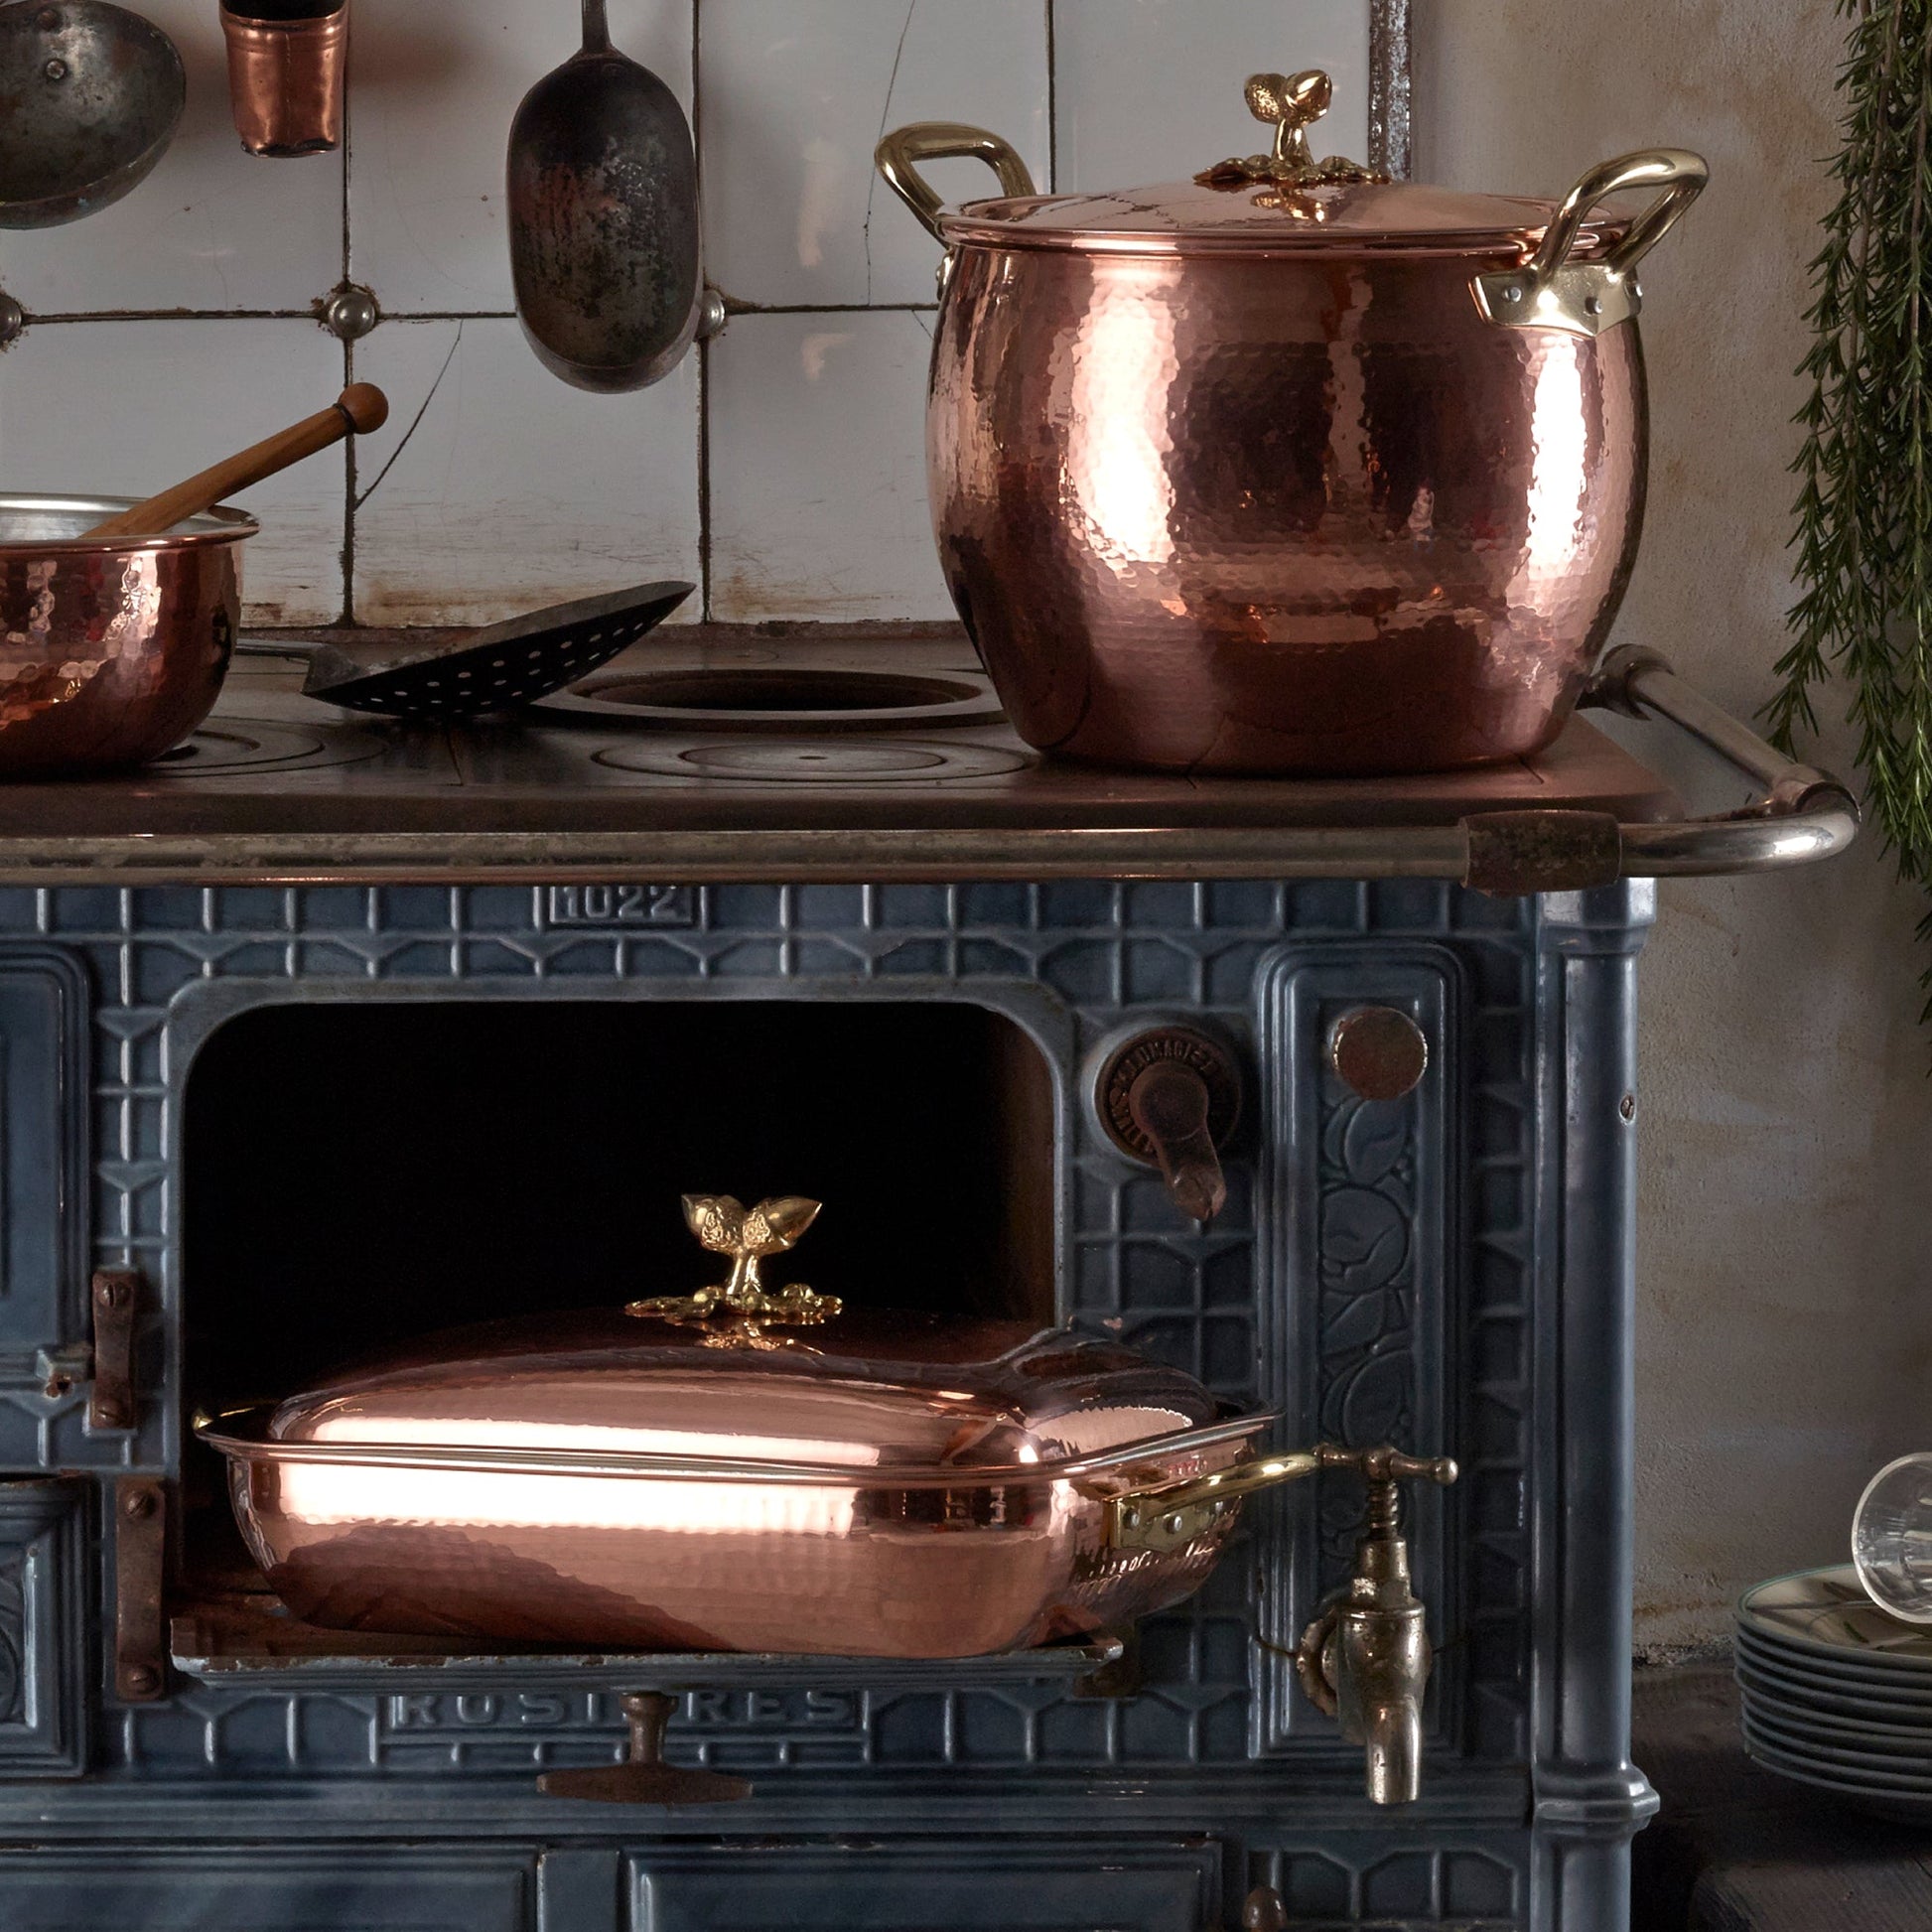 Hammered copper 5.5 Rectangular Roaster lined with high purity tin applied by hand over fire and bronze handles, from Ruffoni Historia collection